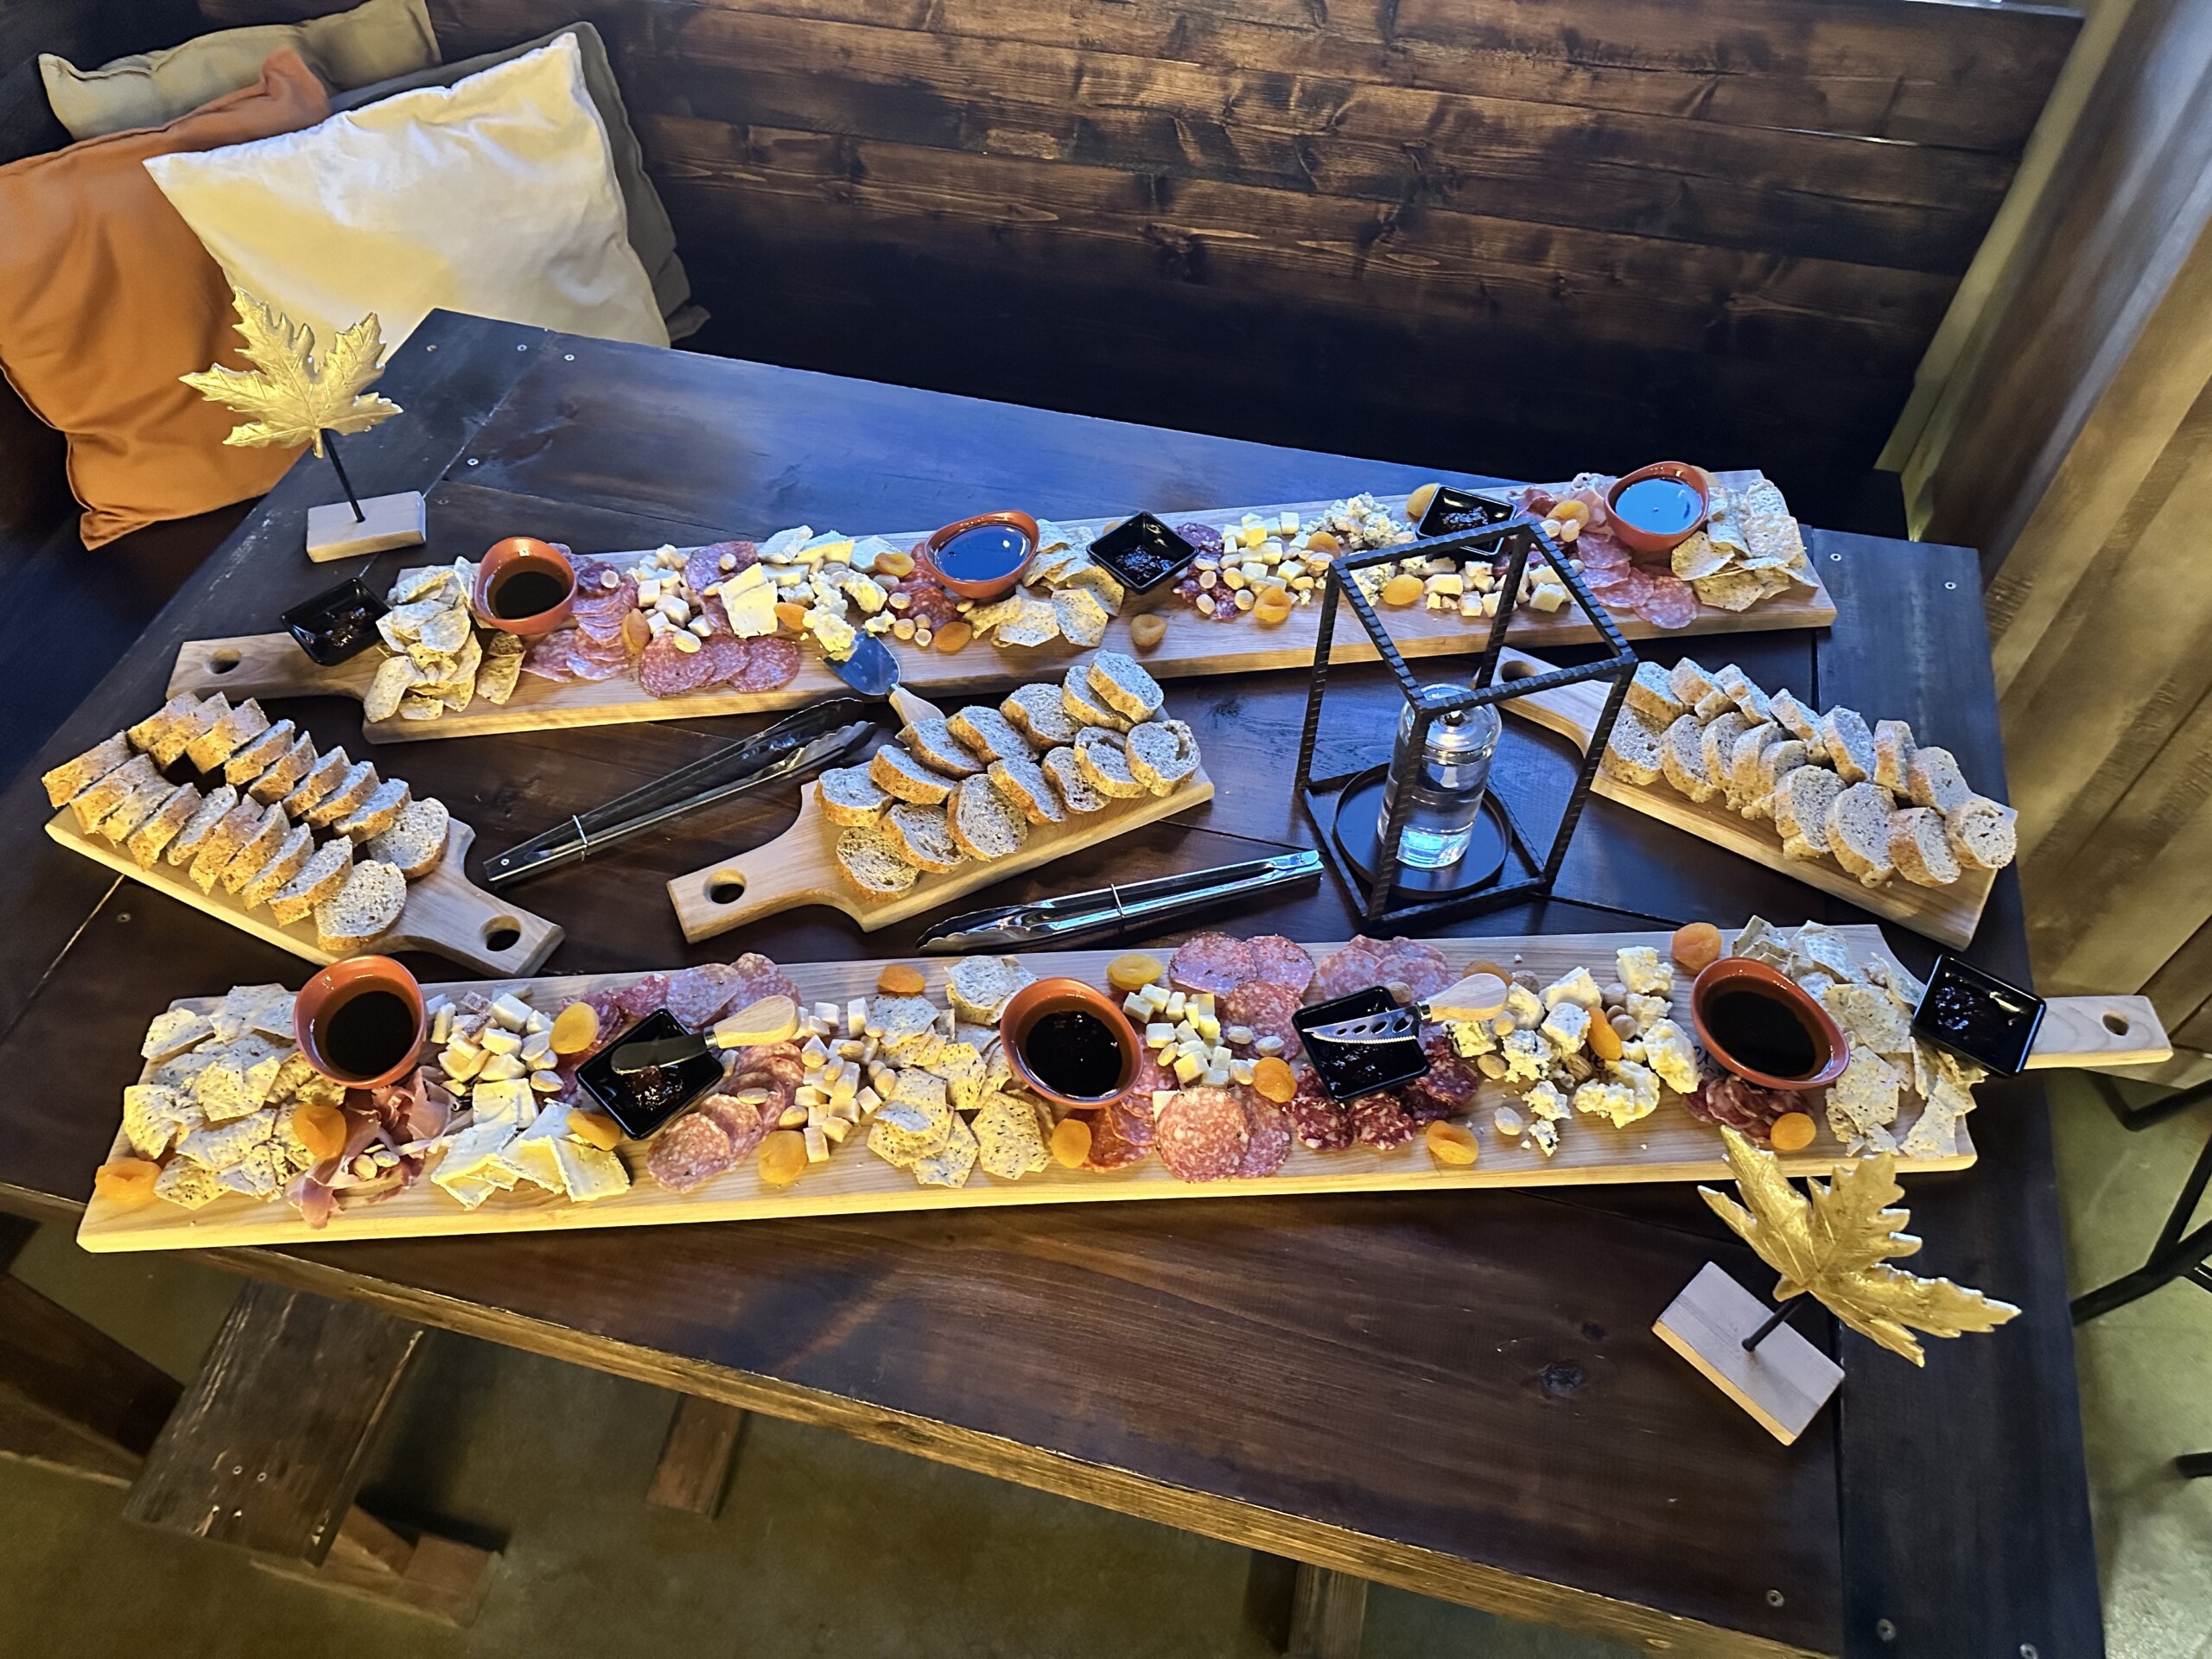 Private Parties: Dine on crafted charcuterie boards for your special event.